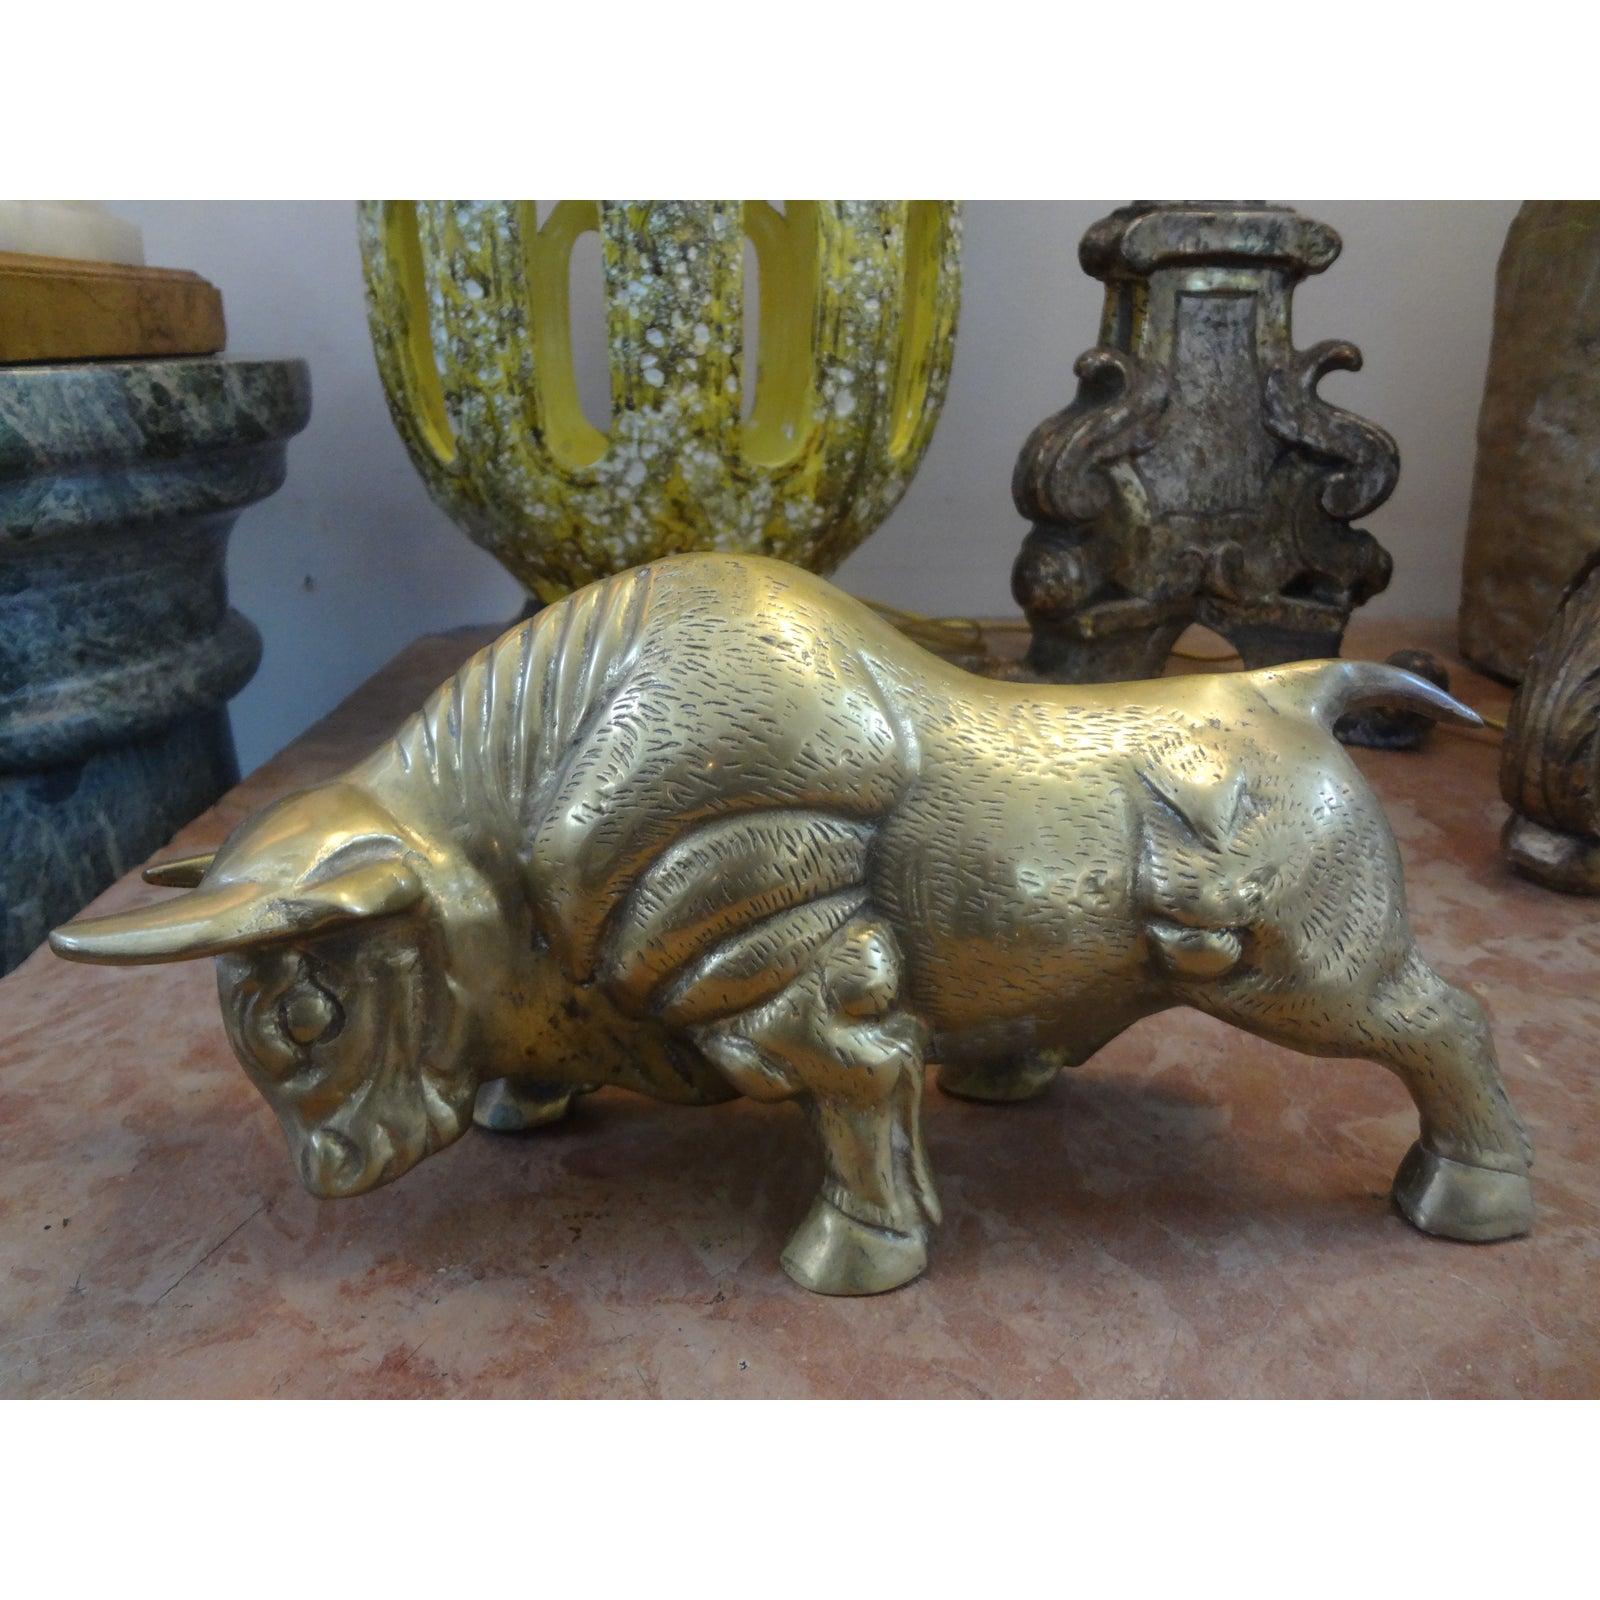 Well Cast mid-century cast brass bull figure or statue. This beautifully detailed Hollywood Regency stylized brass bull sculpture would look great on a tabletop or in a bookcase.